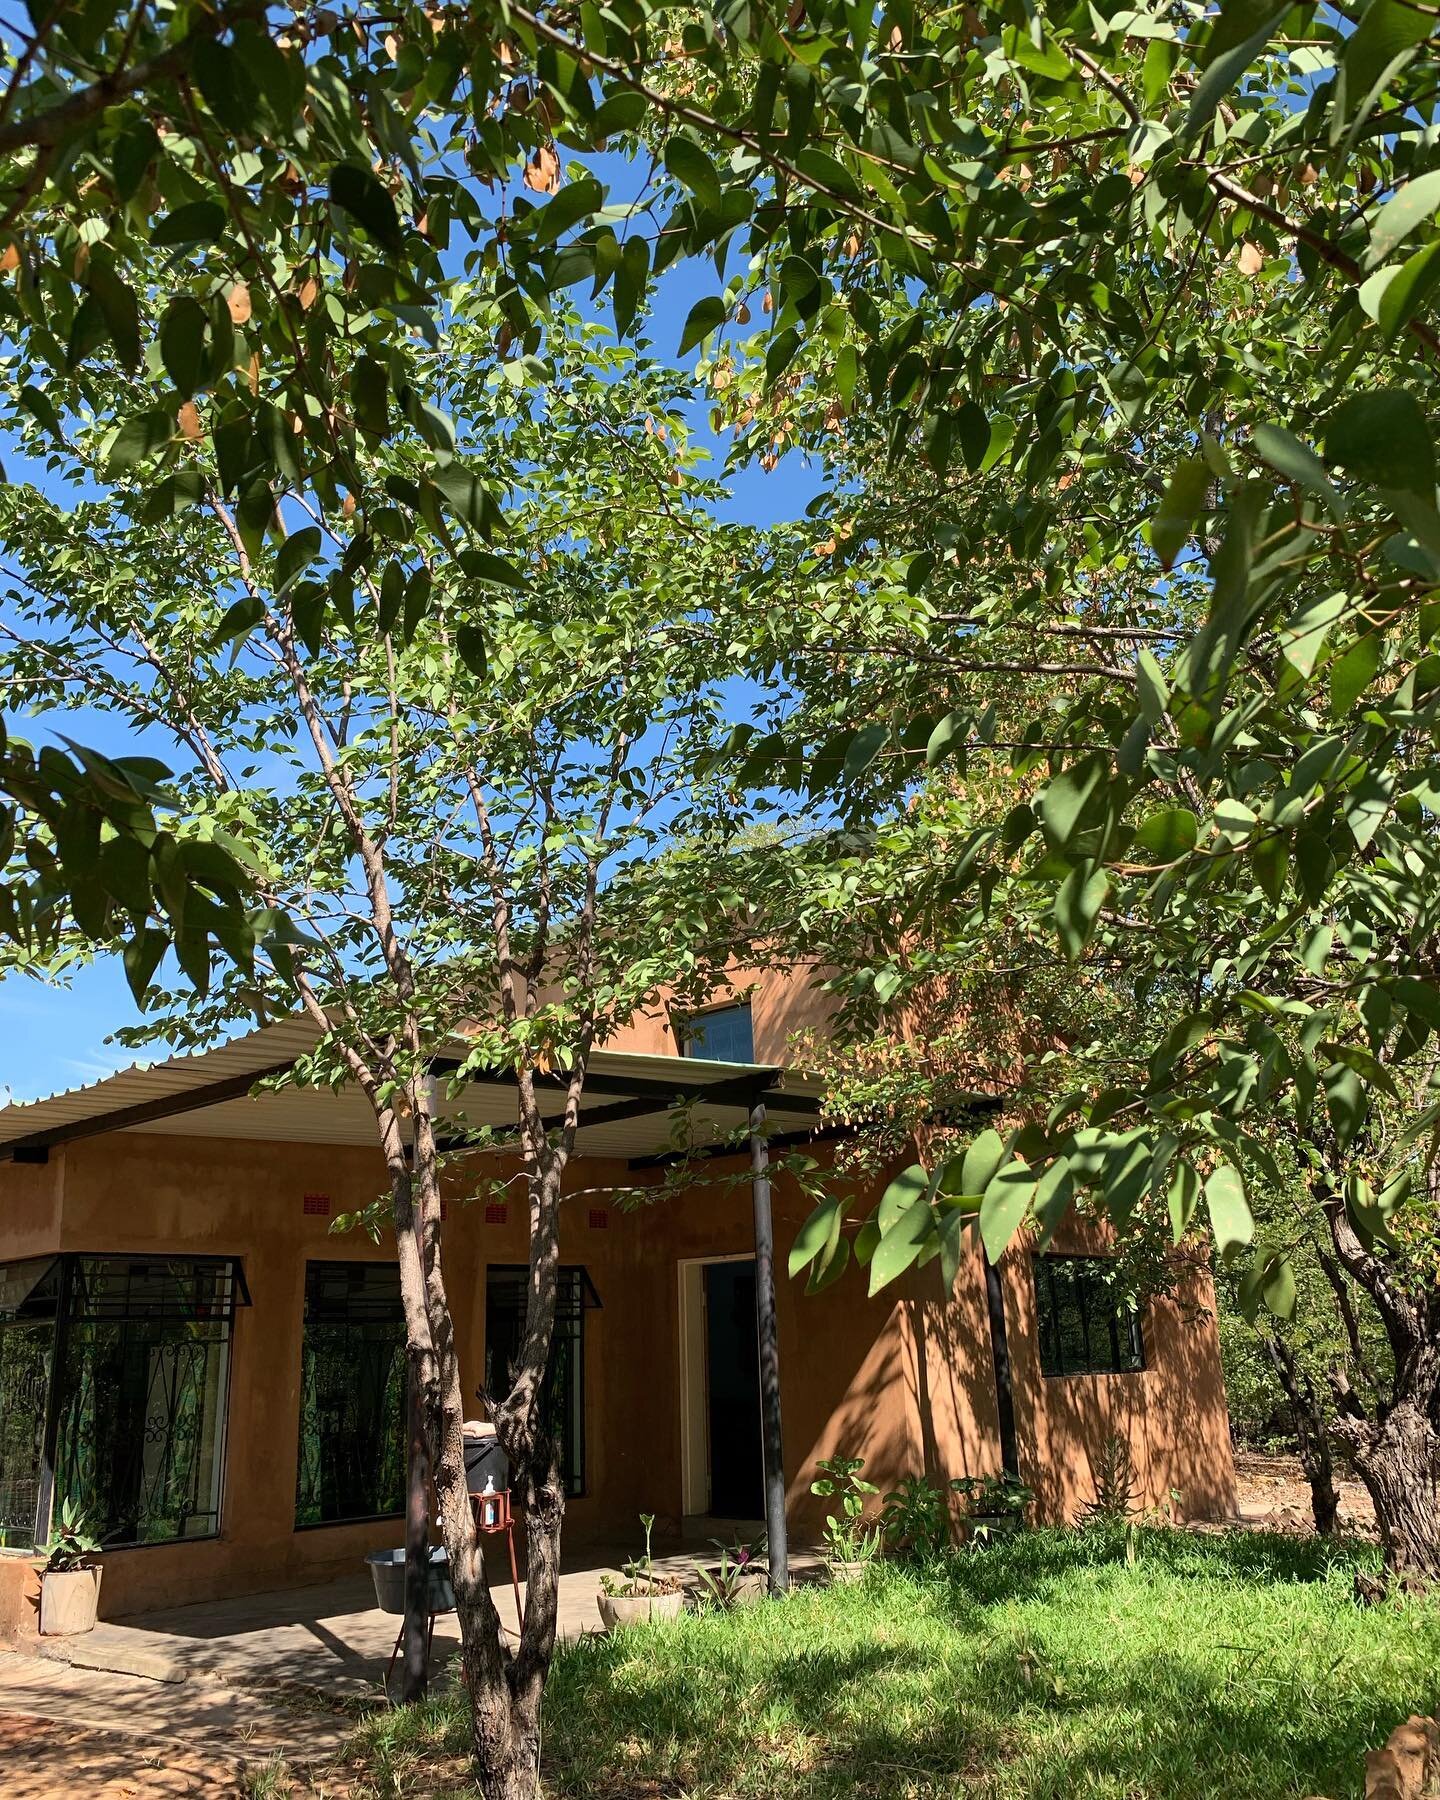 Good afternoon from our beautiful Textile Studio amongst the Mopane Trees. We are hiring! Scroll through the carousel to see our job opportunities. There are only 3 days left!